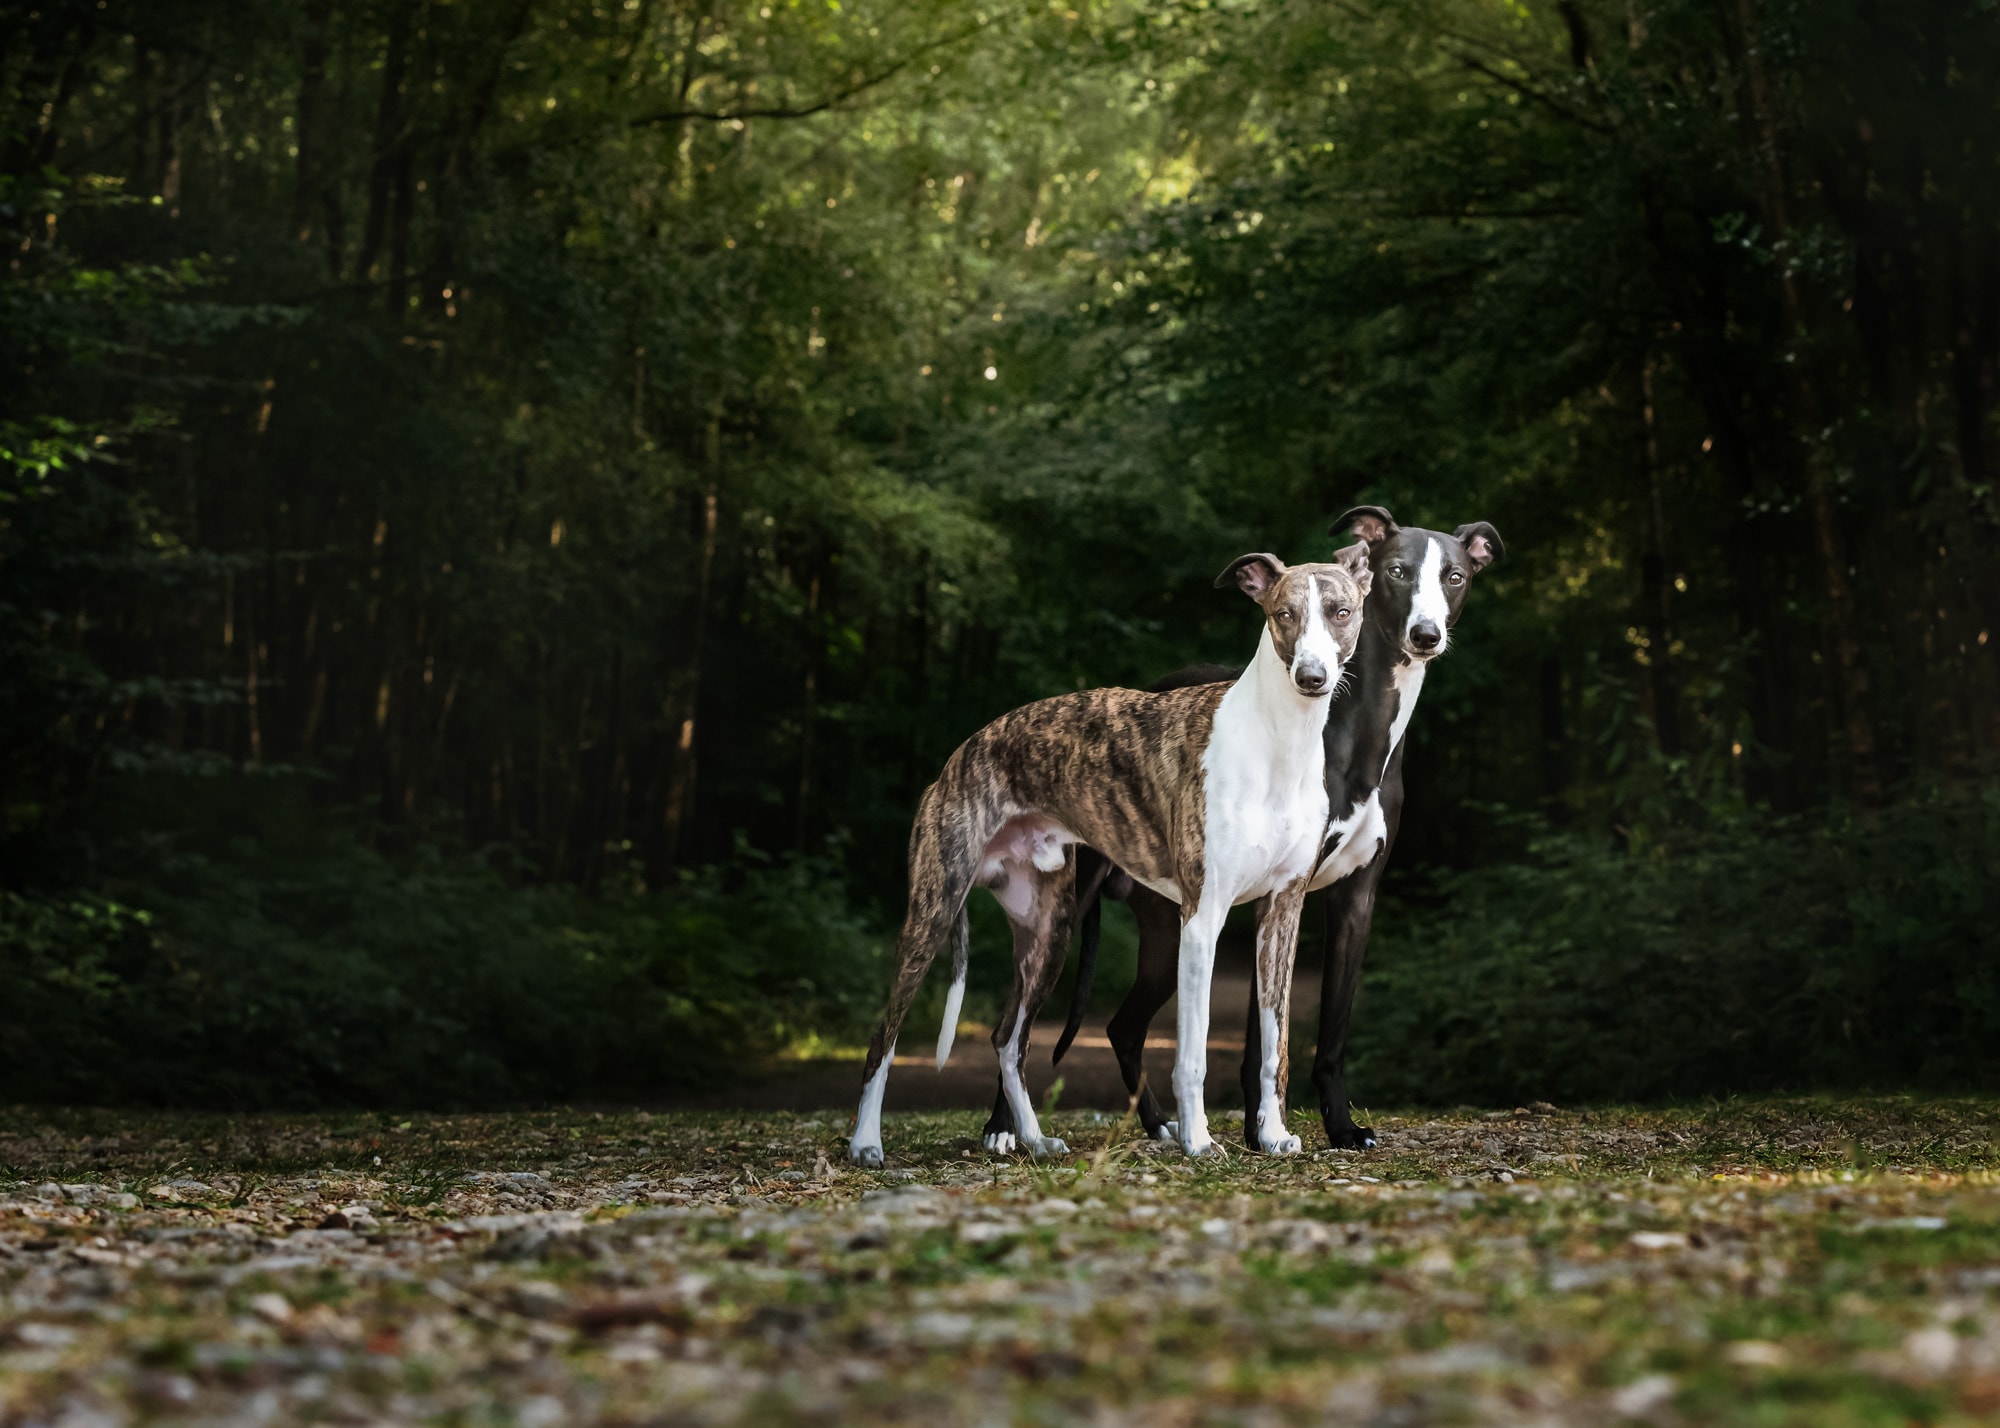 Nic BIsseker Photography dog photographer west sussex